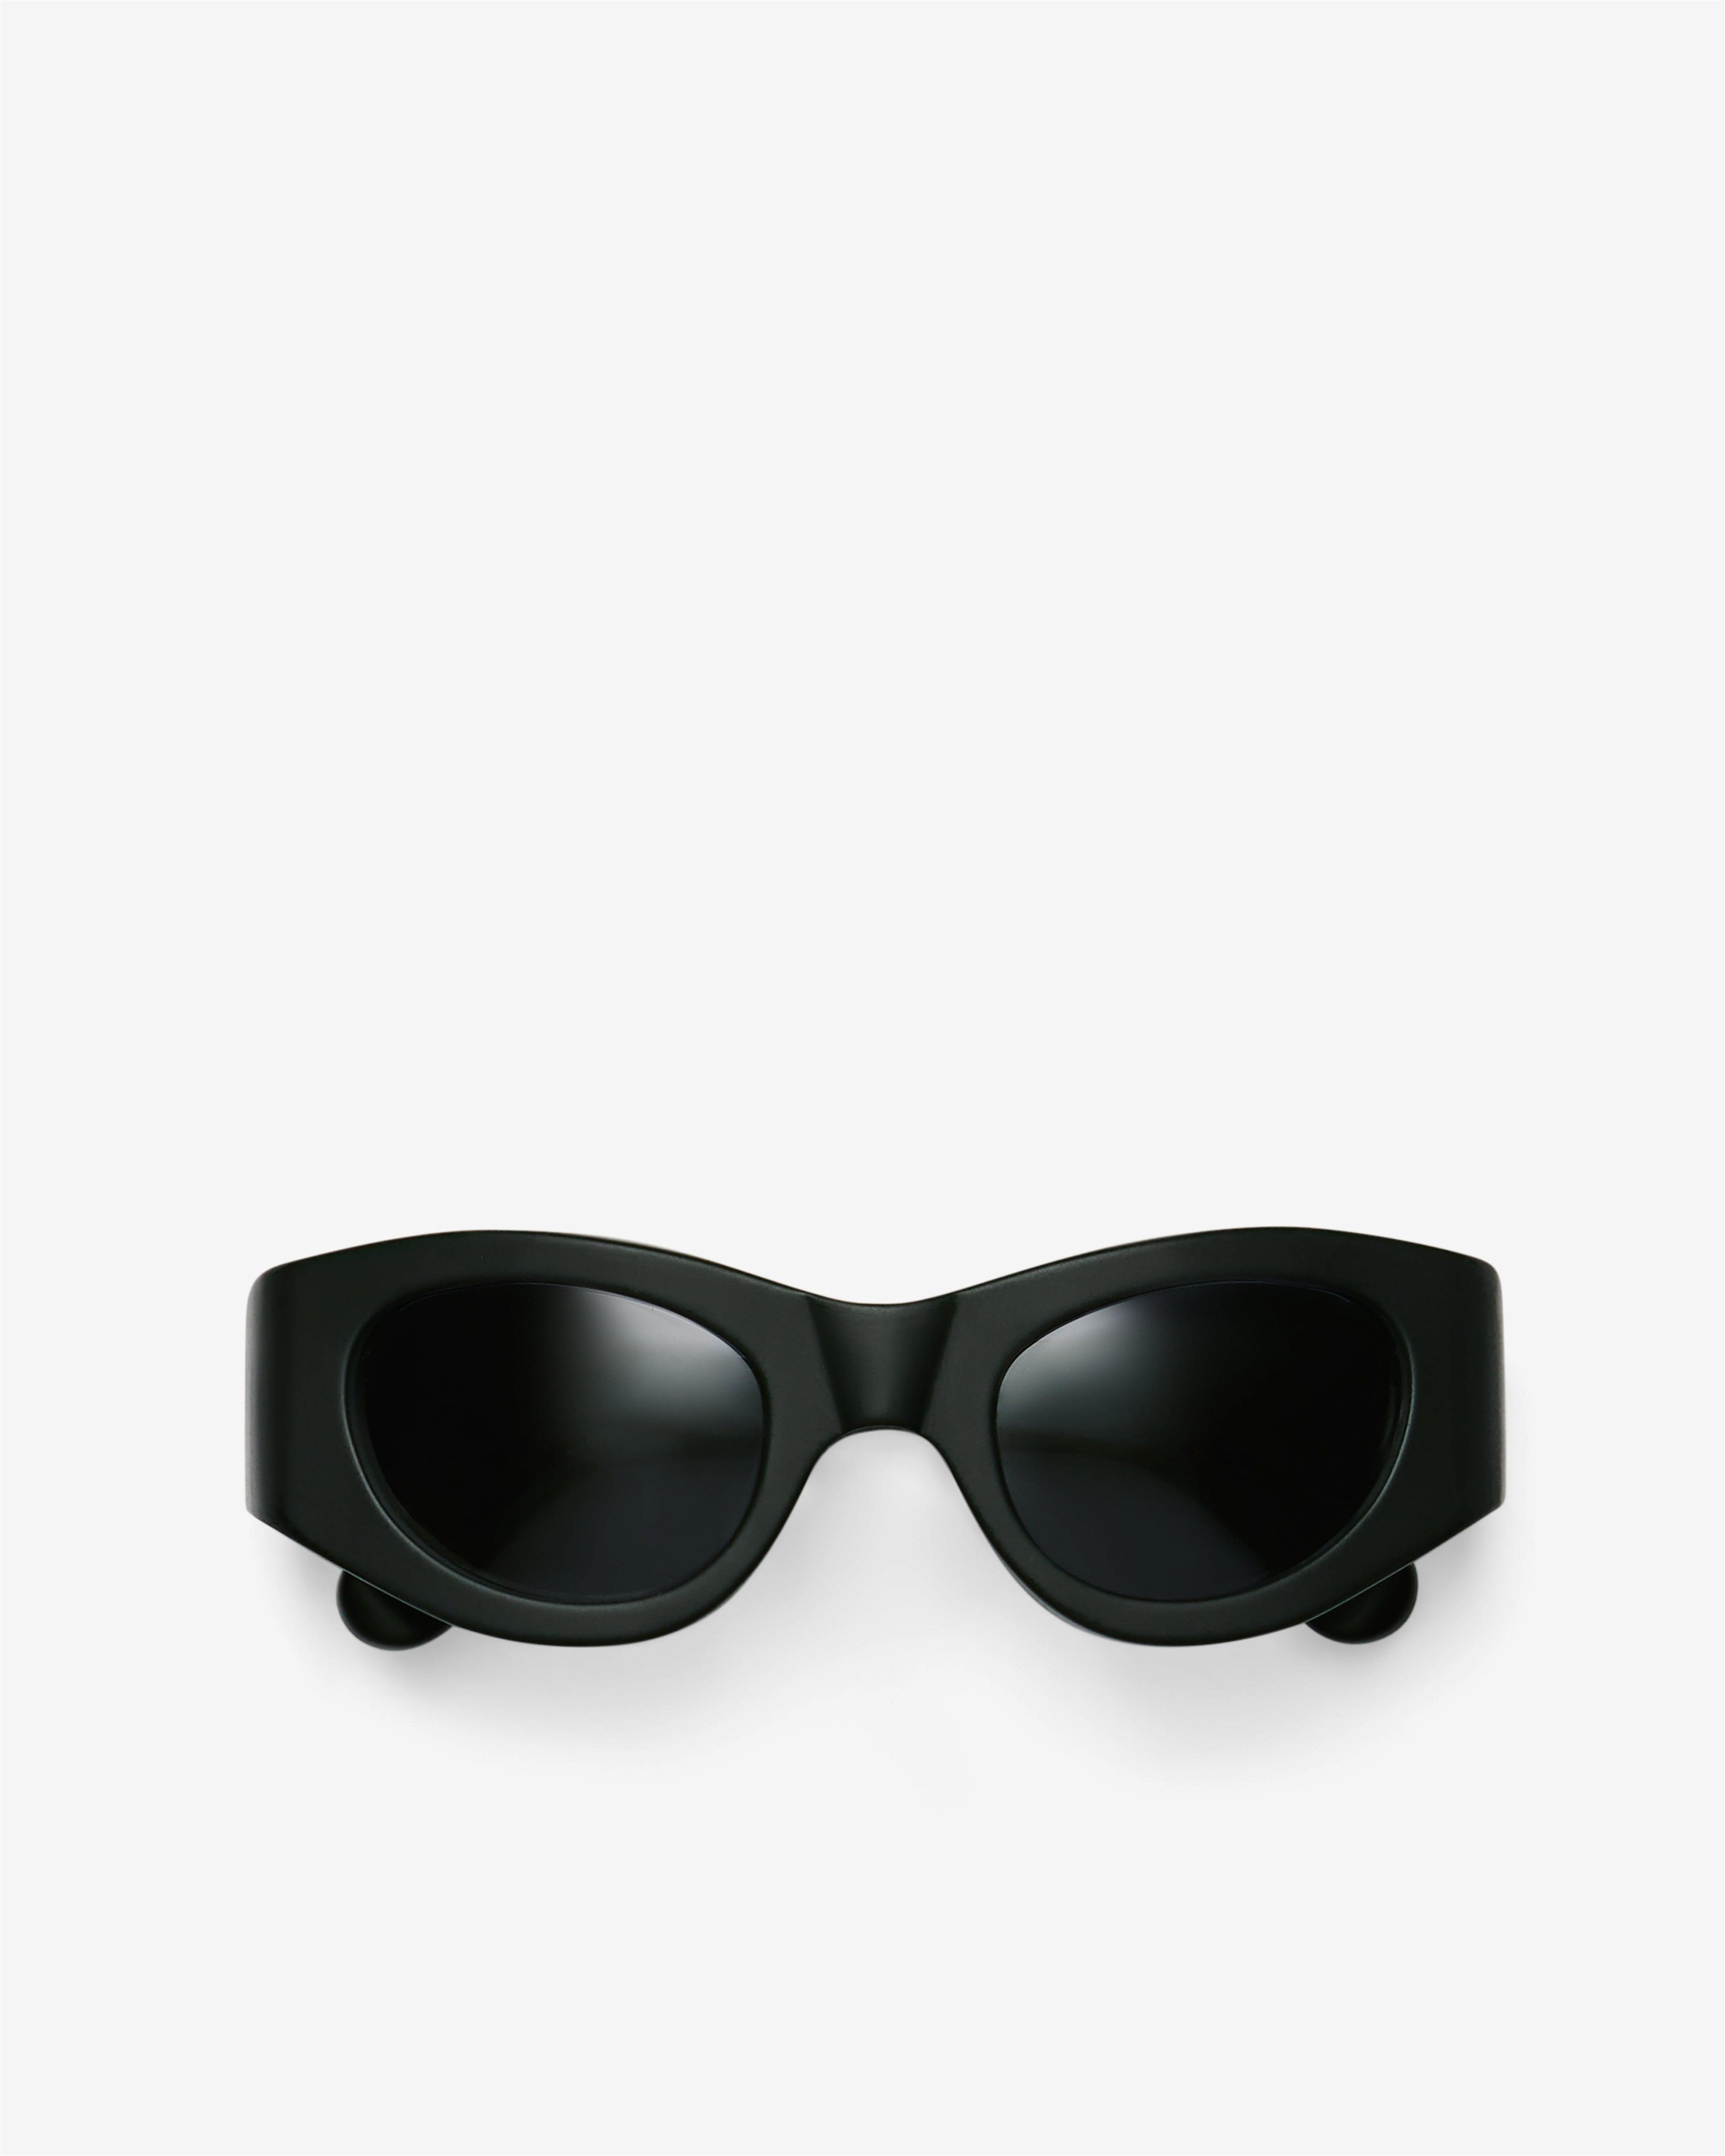 ERL - Bro Sunglasses - (Black) by ERL